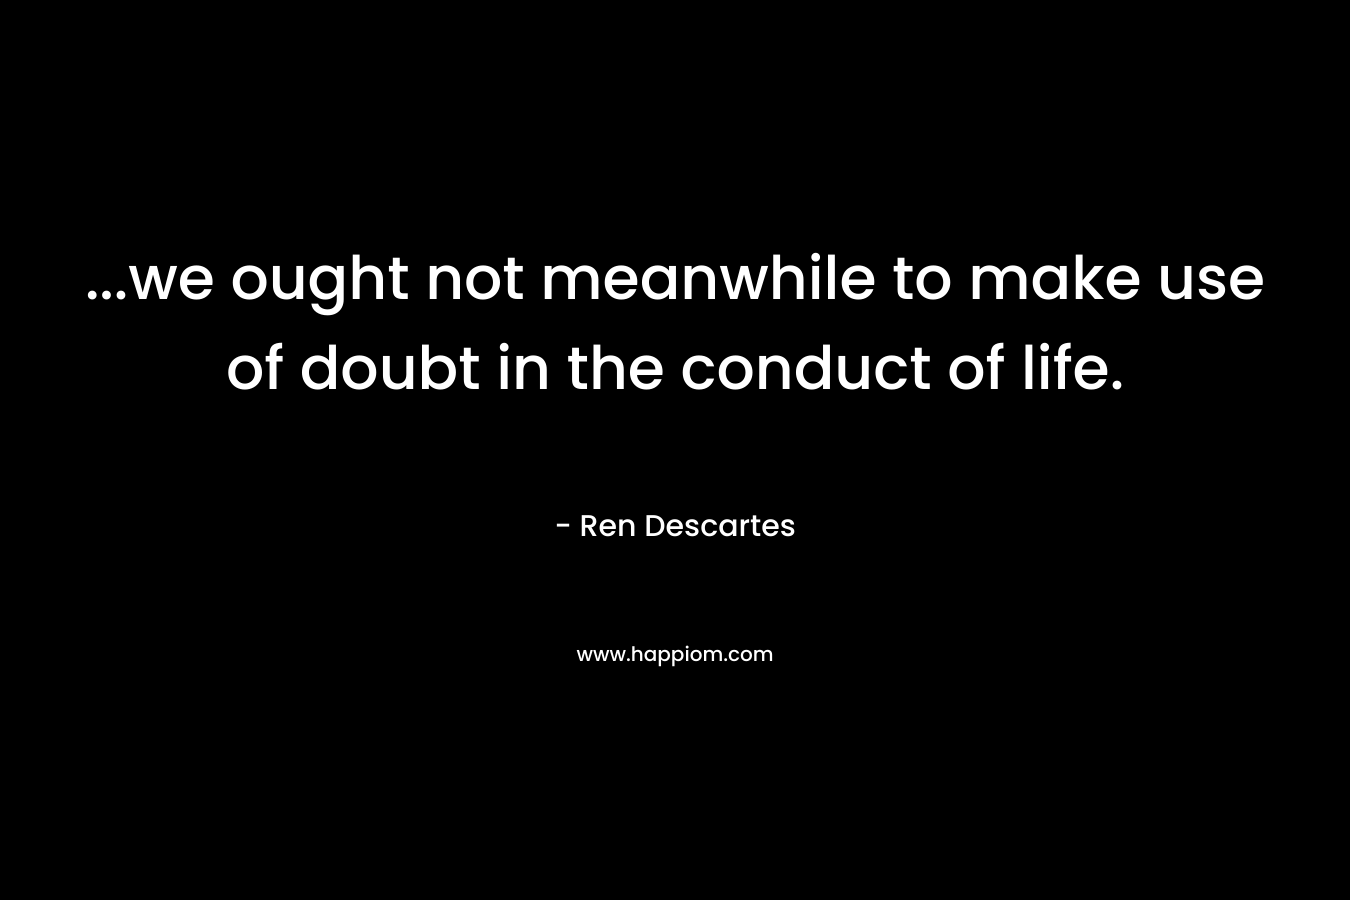 …we ought not meanwhile to make use of doubt in the conduct of life. – Ren Descartes